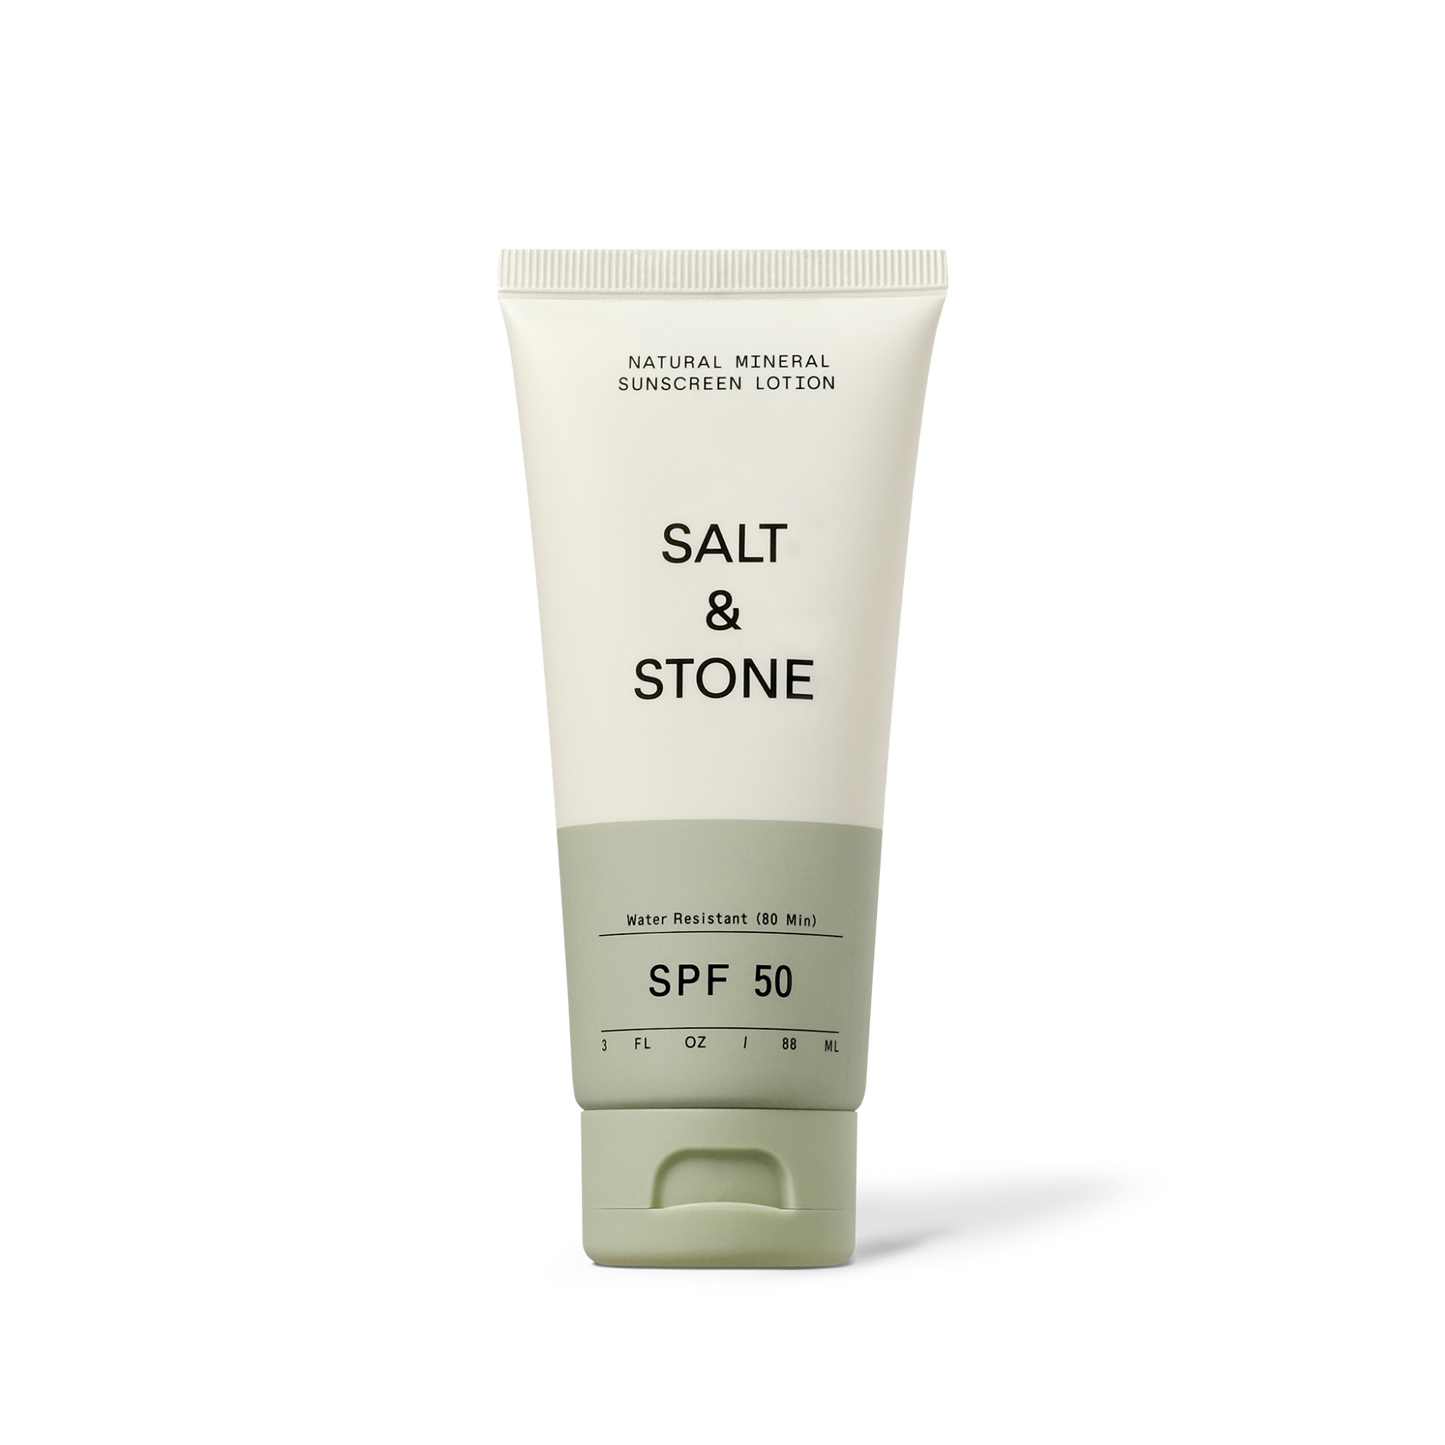 Primary Image of Natural Mineral Sunscreen Lotion SPF 50